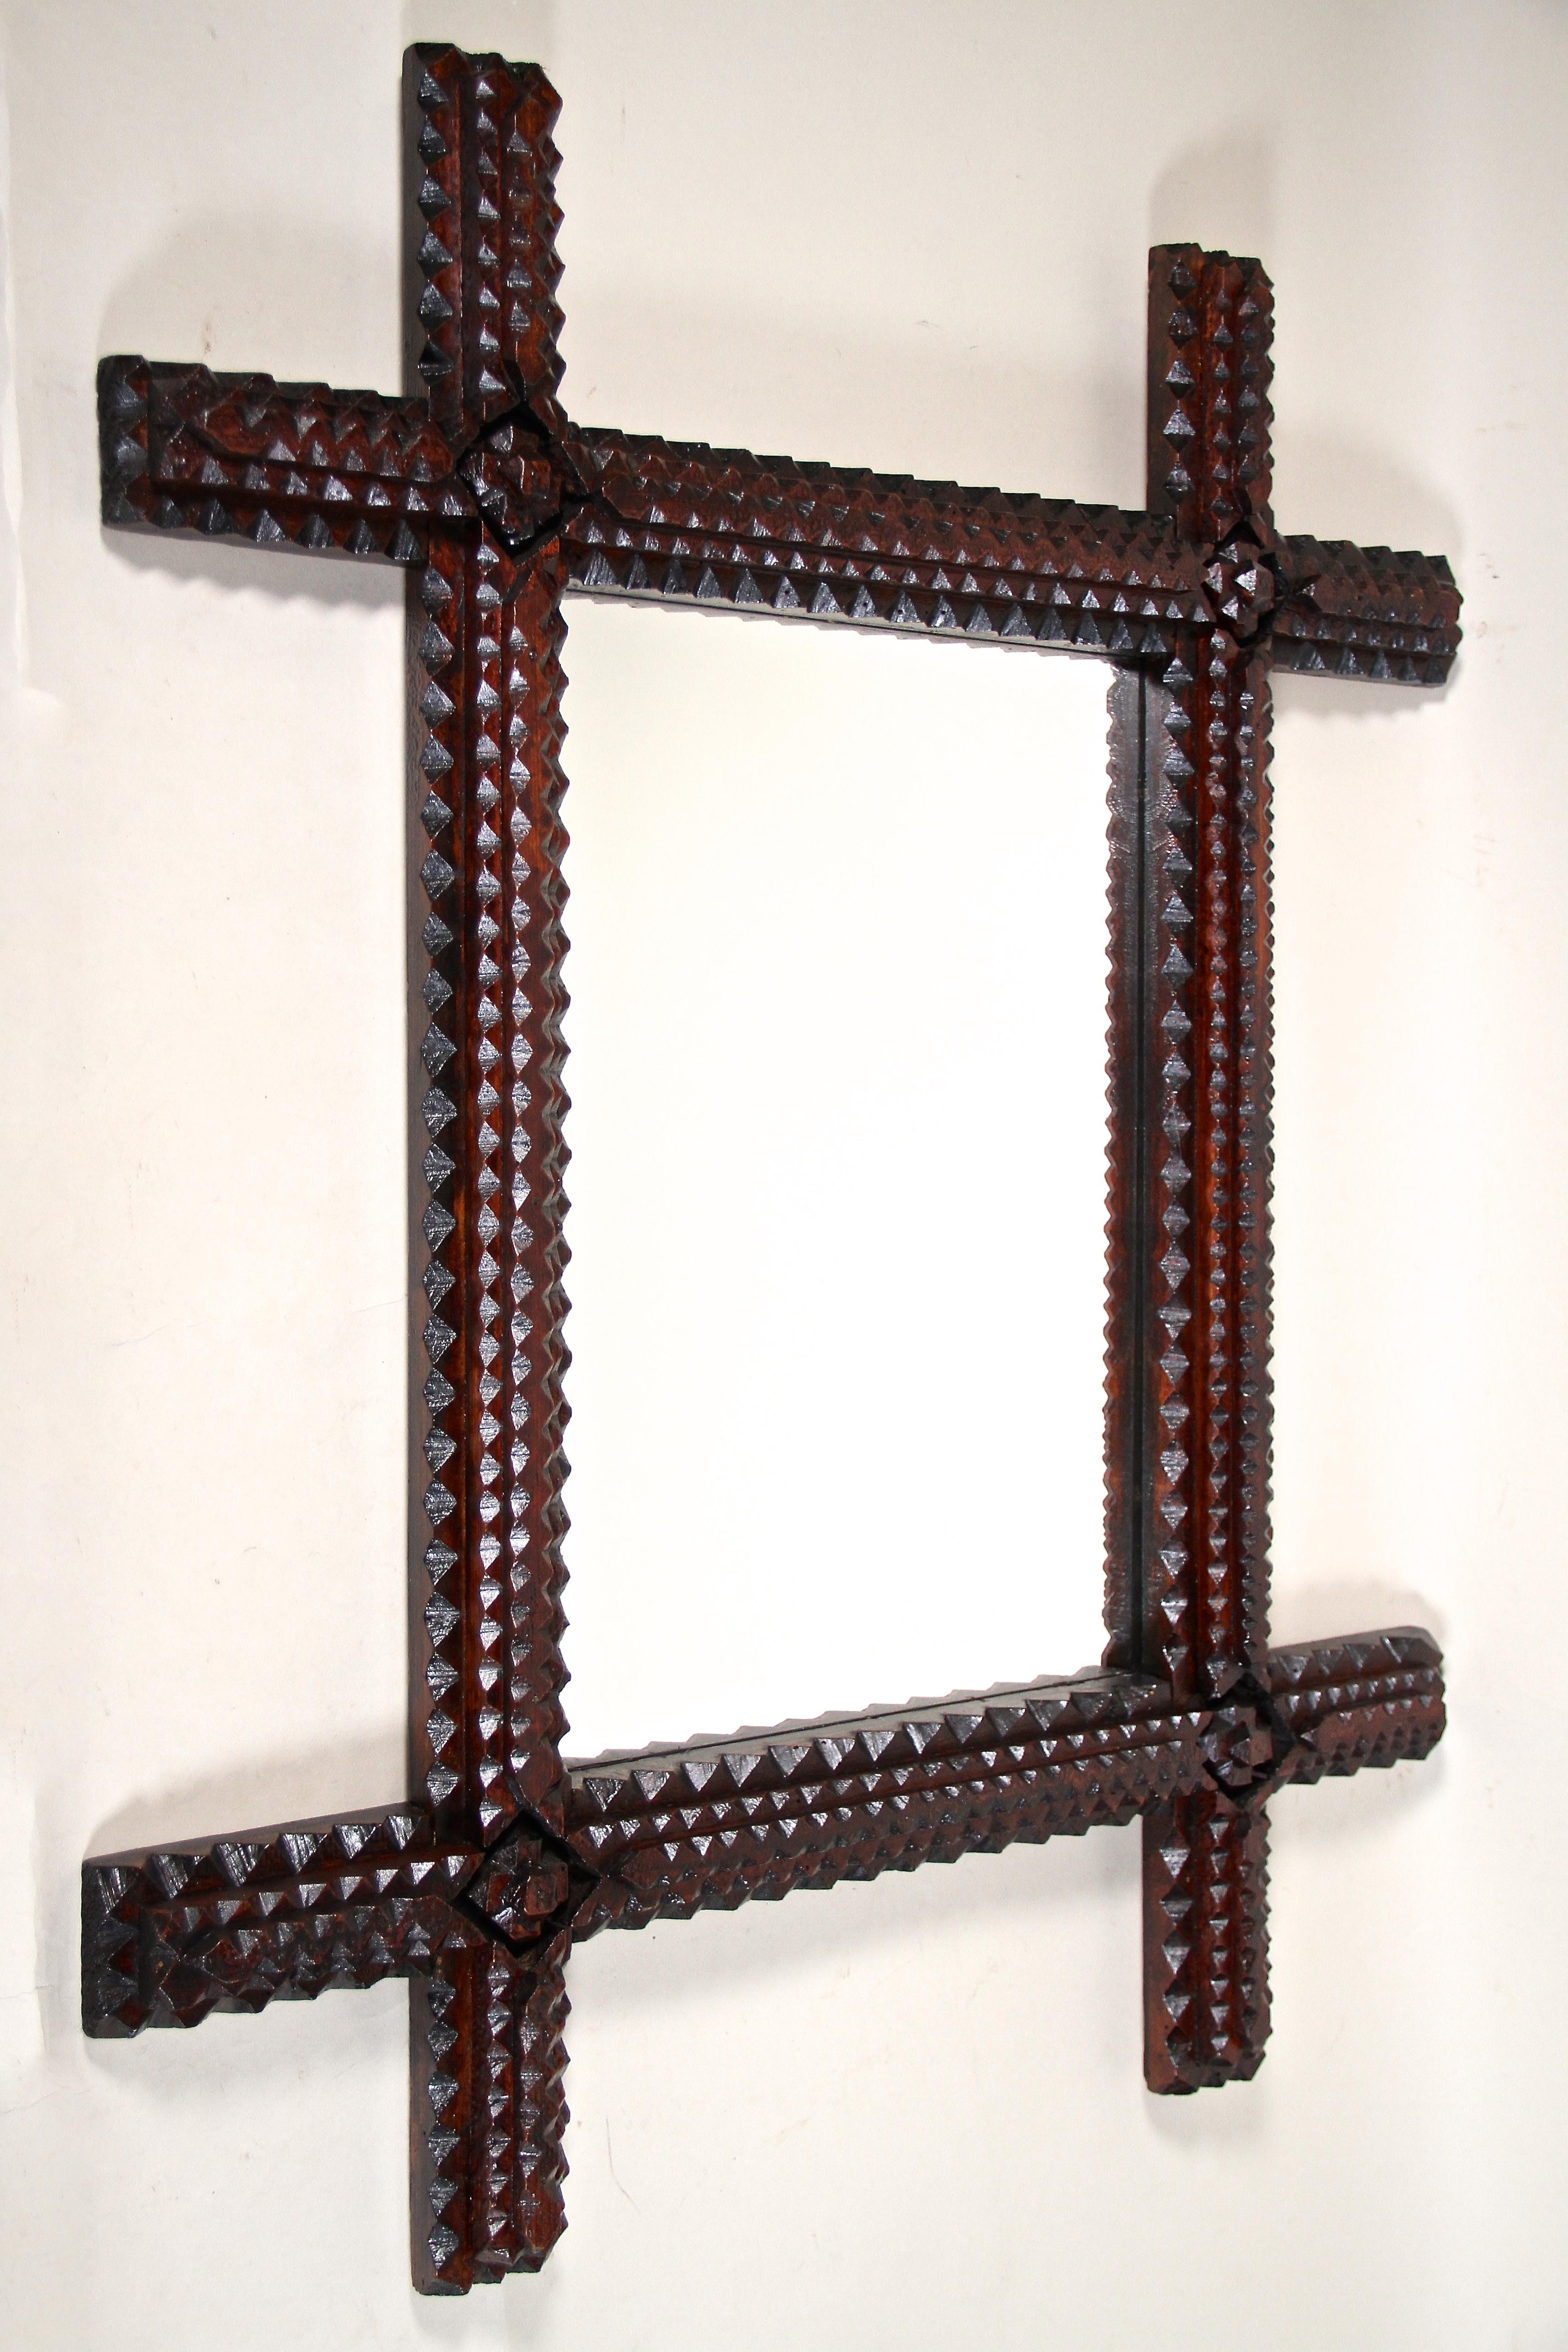 Unusual rustic Tramp Art wall mirror from the late 19th century around 1870 in Austria. Hand carved out of fine basswood, the wide frame shows a gorgeous chip carved design with spectacular made corners. The very dark brown stained surface shows a